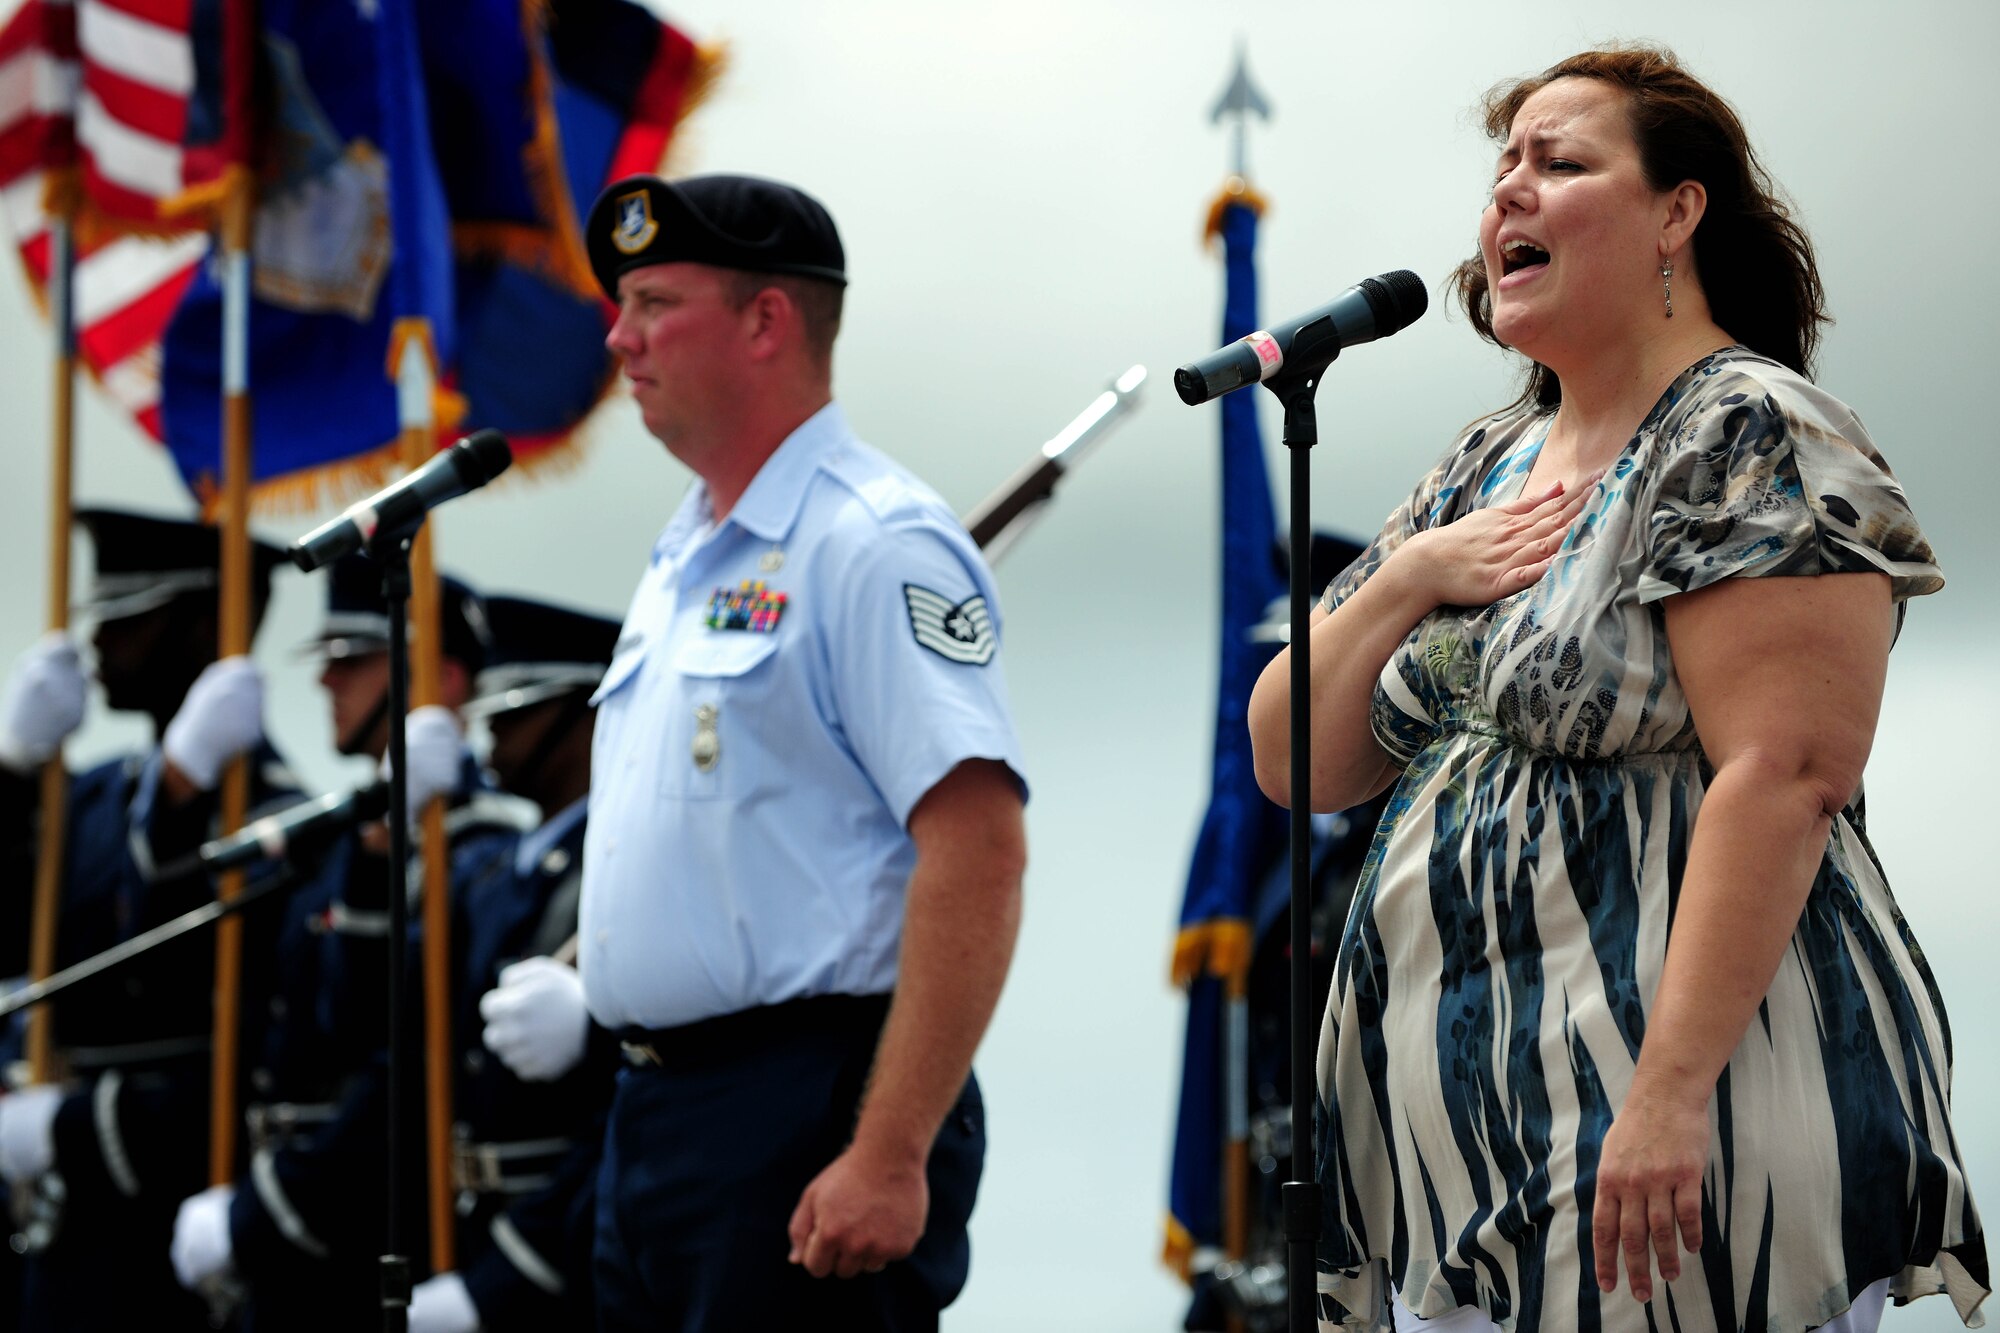 ANDERSEN AIR FORCE BASE, Guam - Margie Richards performs the Guam National hymn here to help kick off Team Andersen Air Show '09 "Air Power Over the Marianas" Oct. 7. The U.S. Air Force Thunderbirds is the premier aerial demonstration team representing Airmen worldwide. Andersen AFB rescheduled its air show for after cancelling it due to Typhoon Melor.  The air show was held primarily to thank the residents of Guam for their continued support to Andersen AFB and the rest of the U.S. Air Force. (U.S. Air Force photo by Airman 1st Class Courtney Witt)
